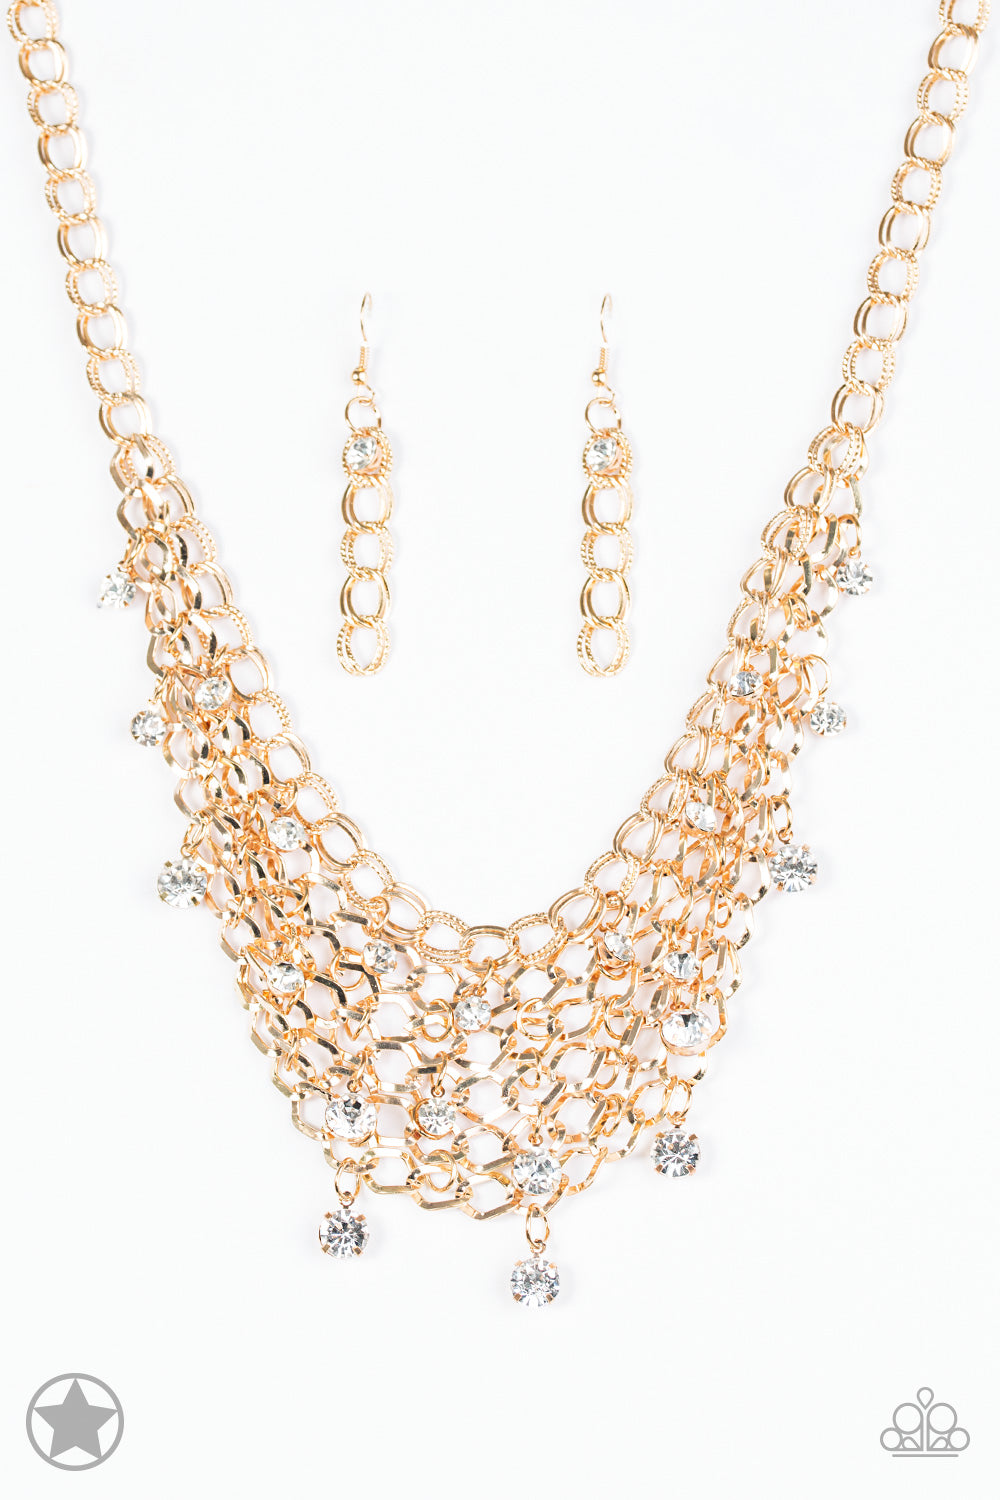 Fishing for Compliments Gold Blockbuster Necklace - Paparazzi Accessories - jazzy-jewels-gems